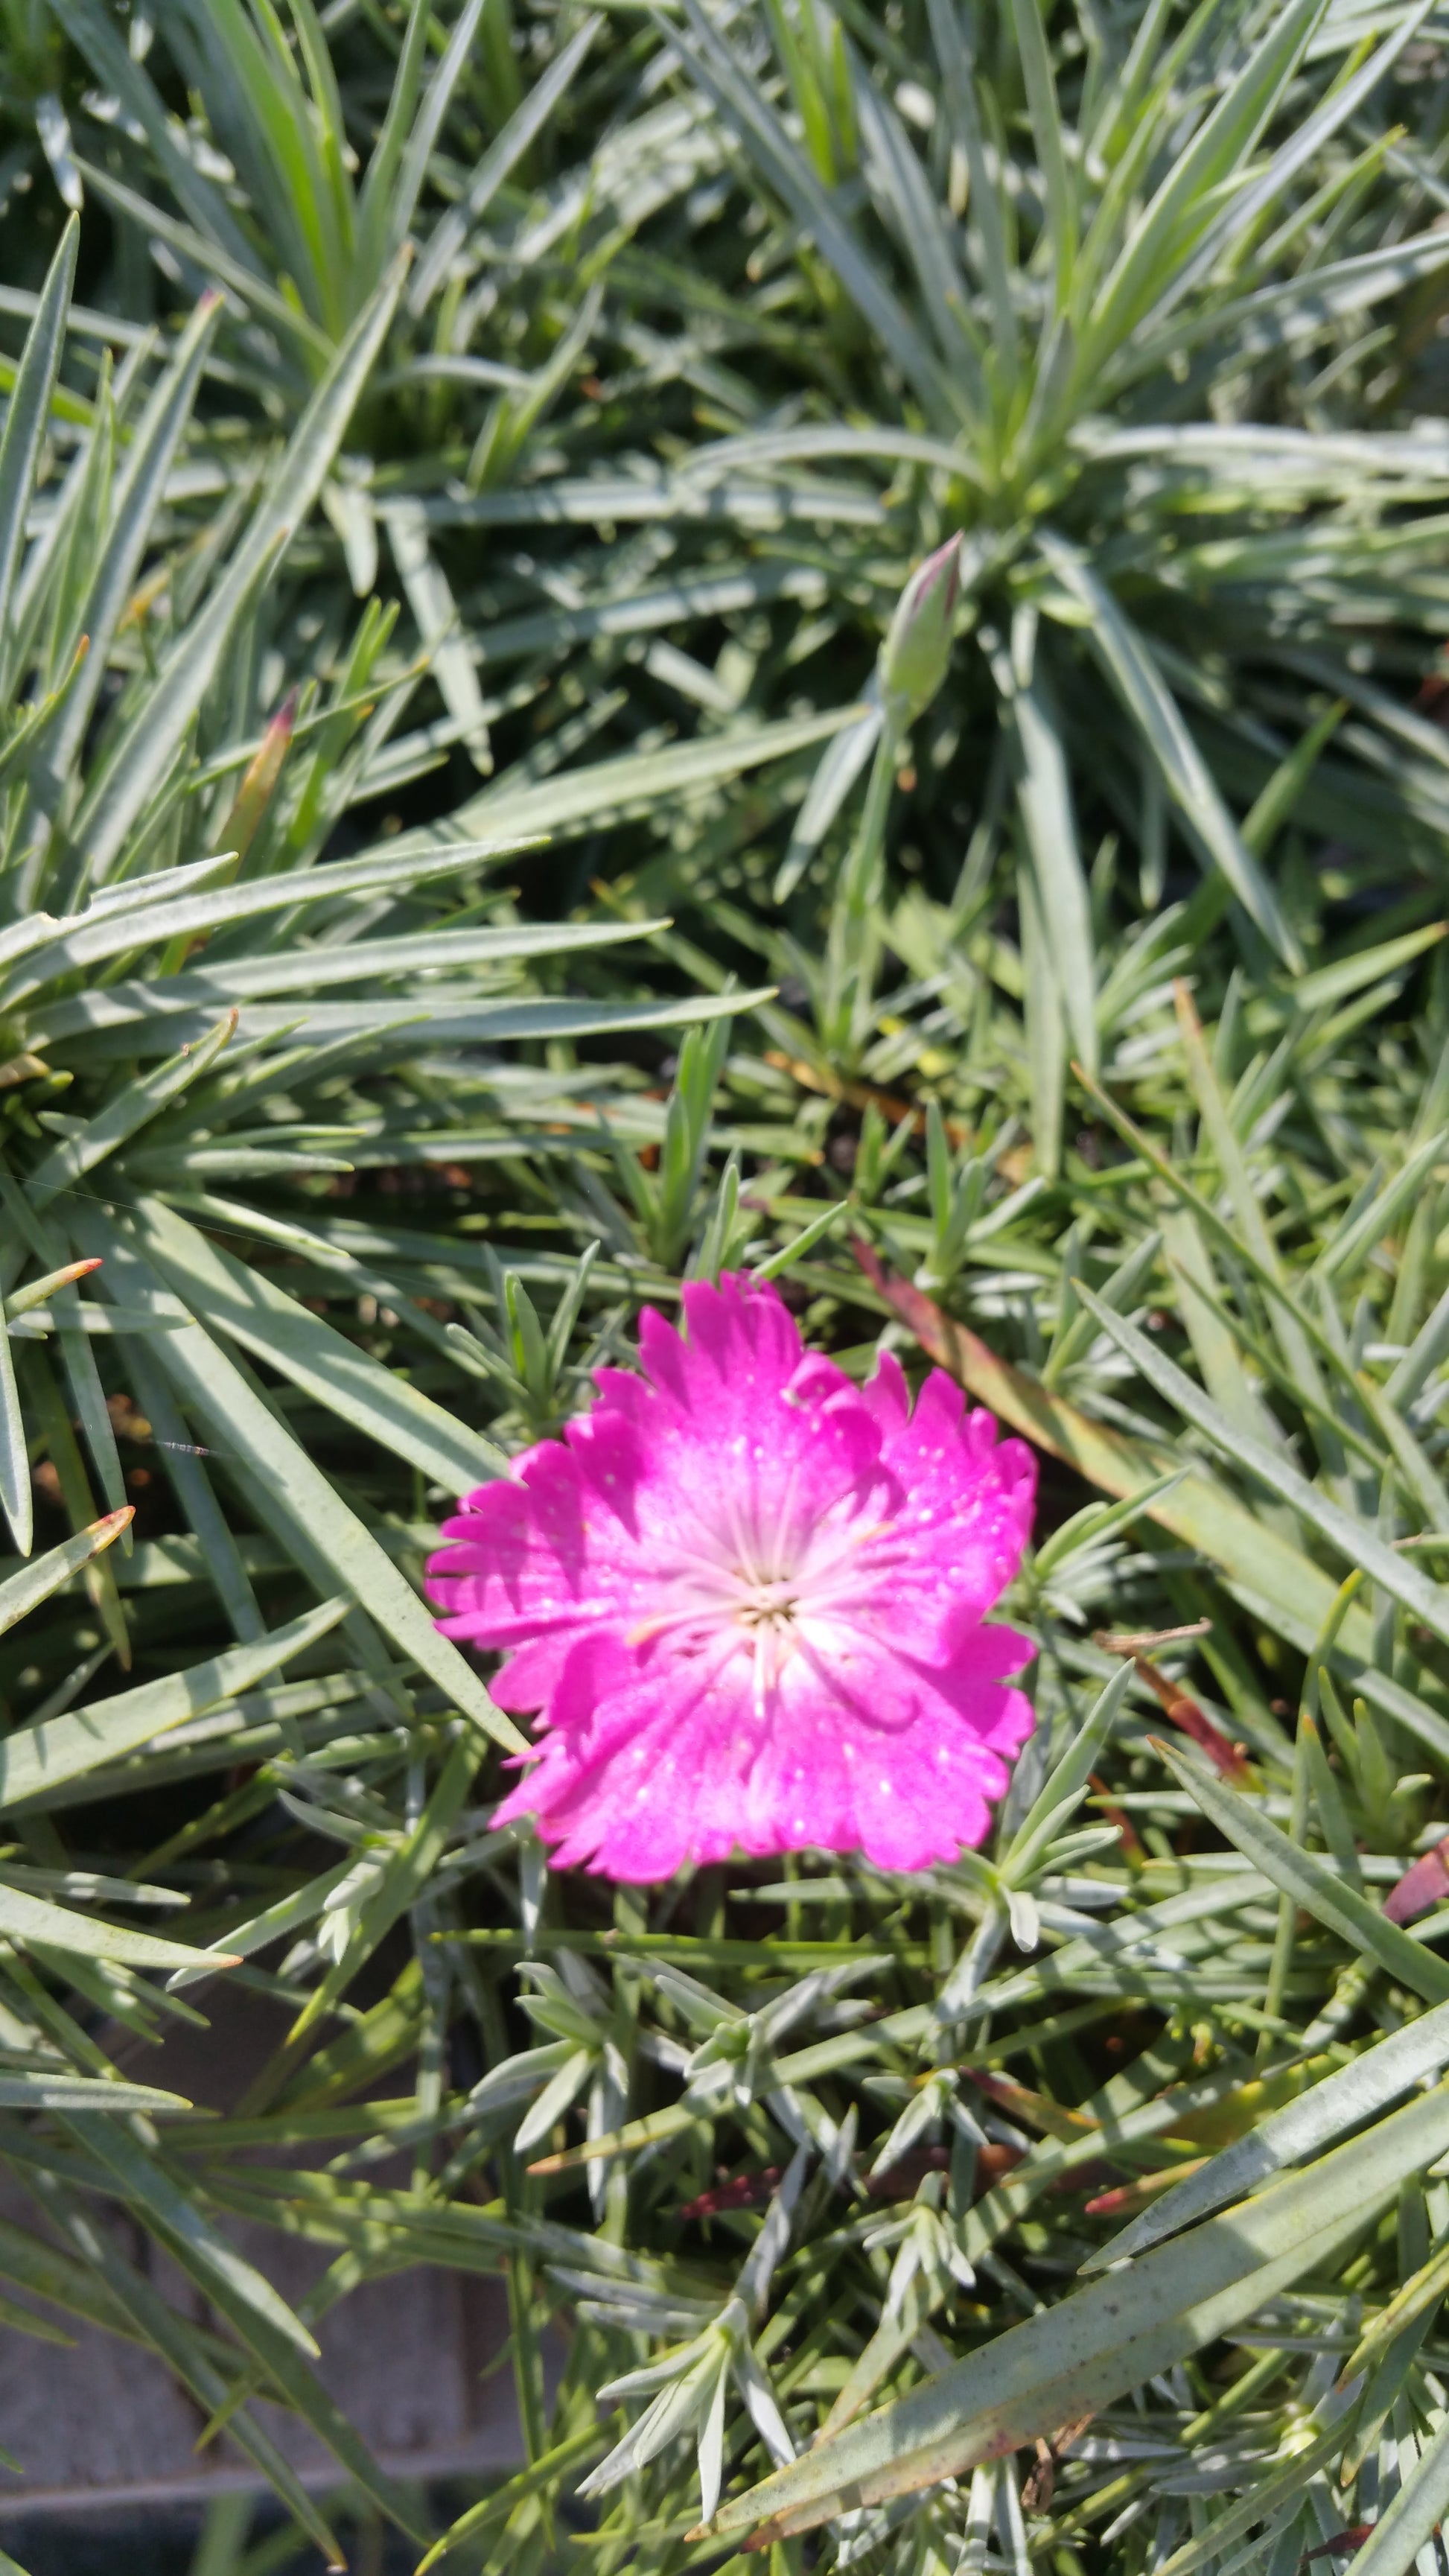 Pink ruffled dianthus feather against gray-green spikey foliage.